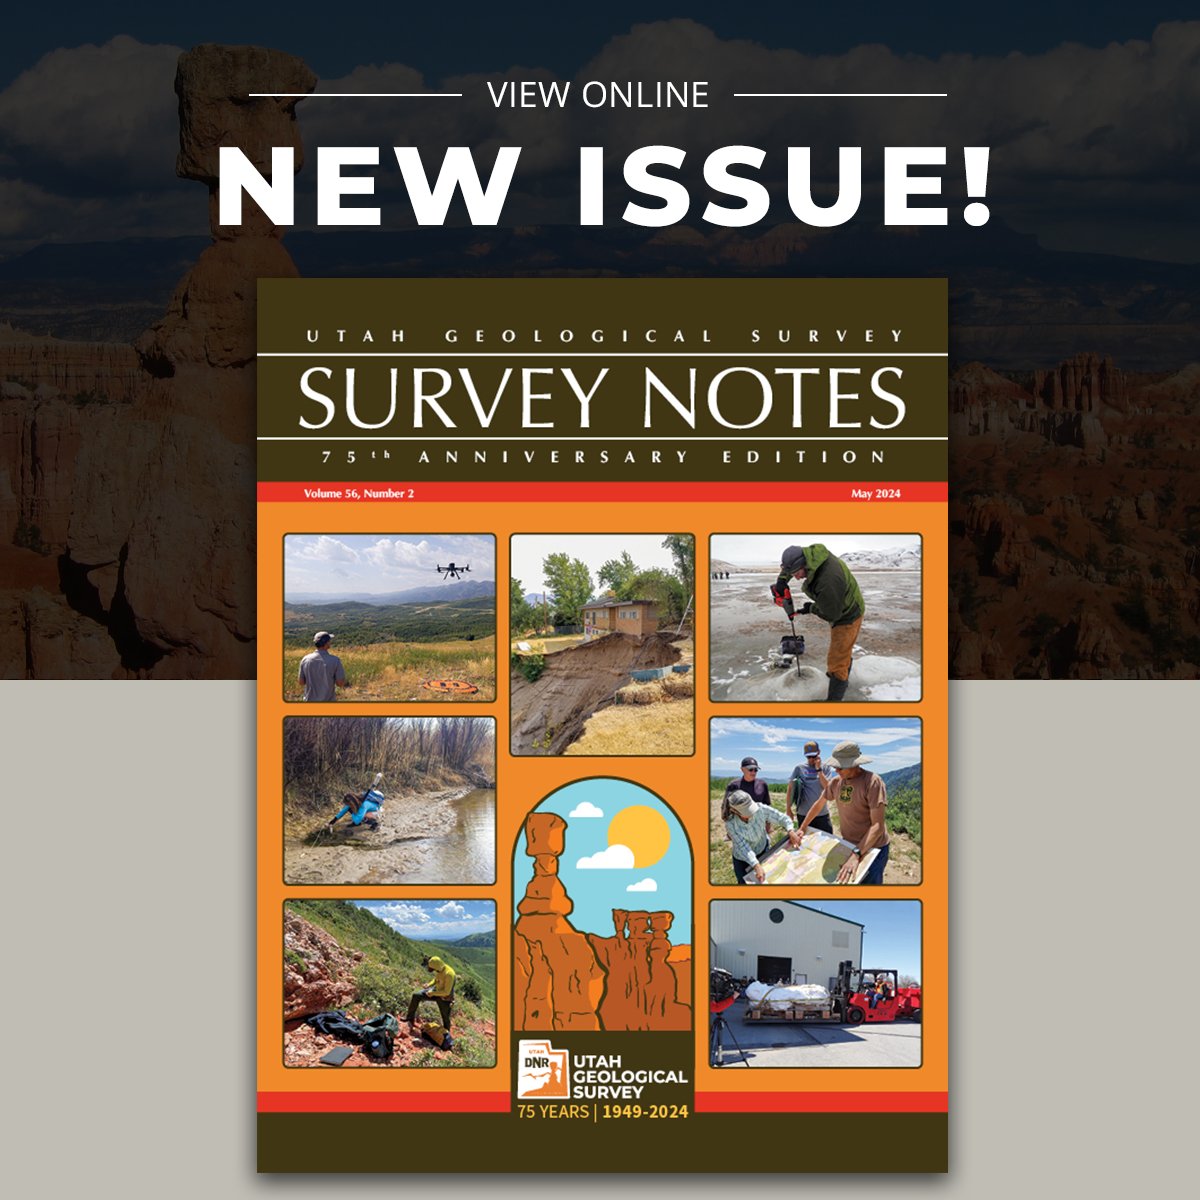 Check out the 75th-anniversary issue of Survey Notes featuring a timeline of important events in the history of the UGS, an article on the evolution within each of the Survey’s programs, employee reflections, and much more. ow.ly/6OoY50RxvLX #utahgeology